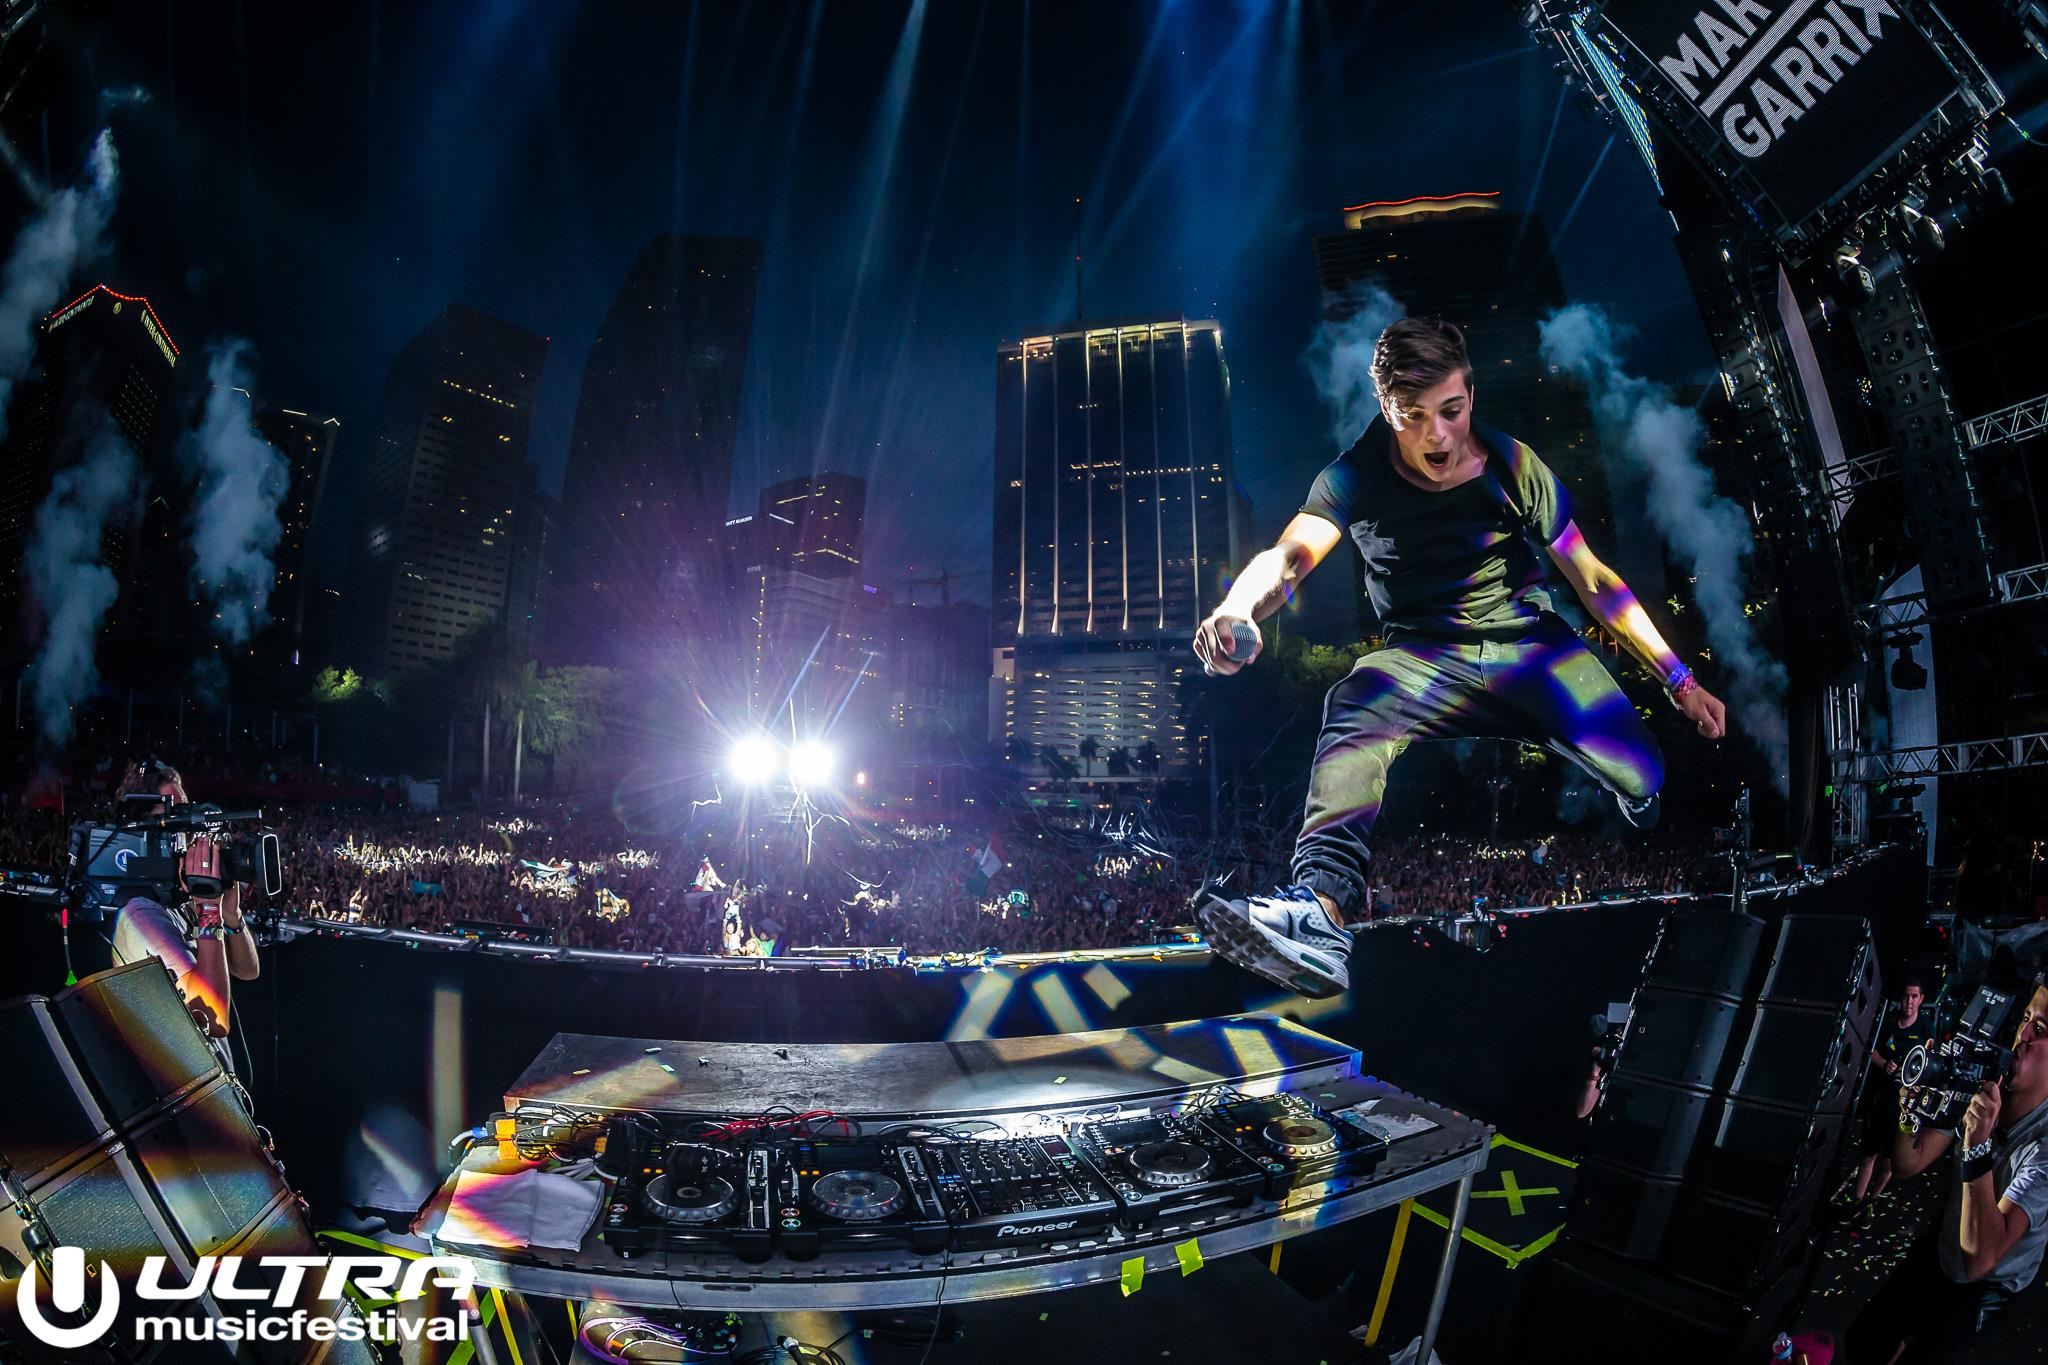 2048x1365 Ultra Music Festival HD Wallpapers and Backgrounds